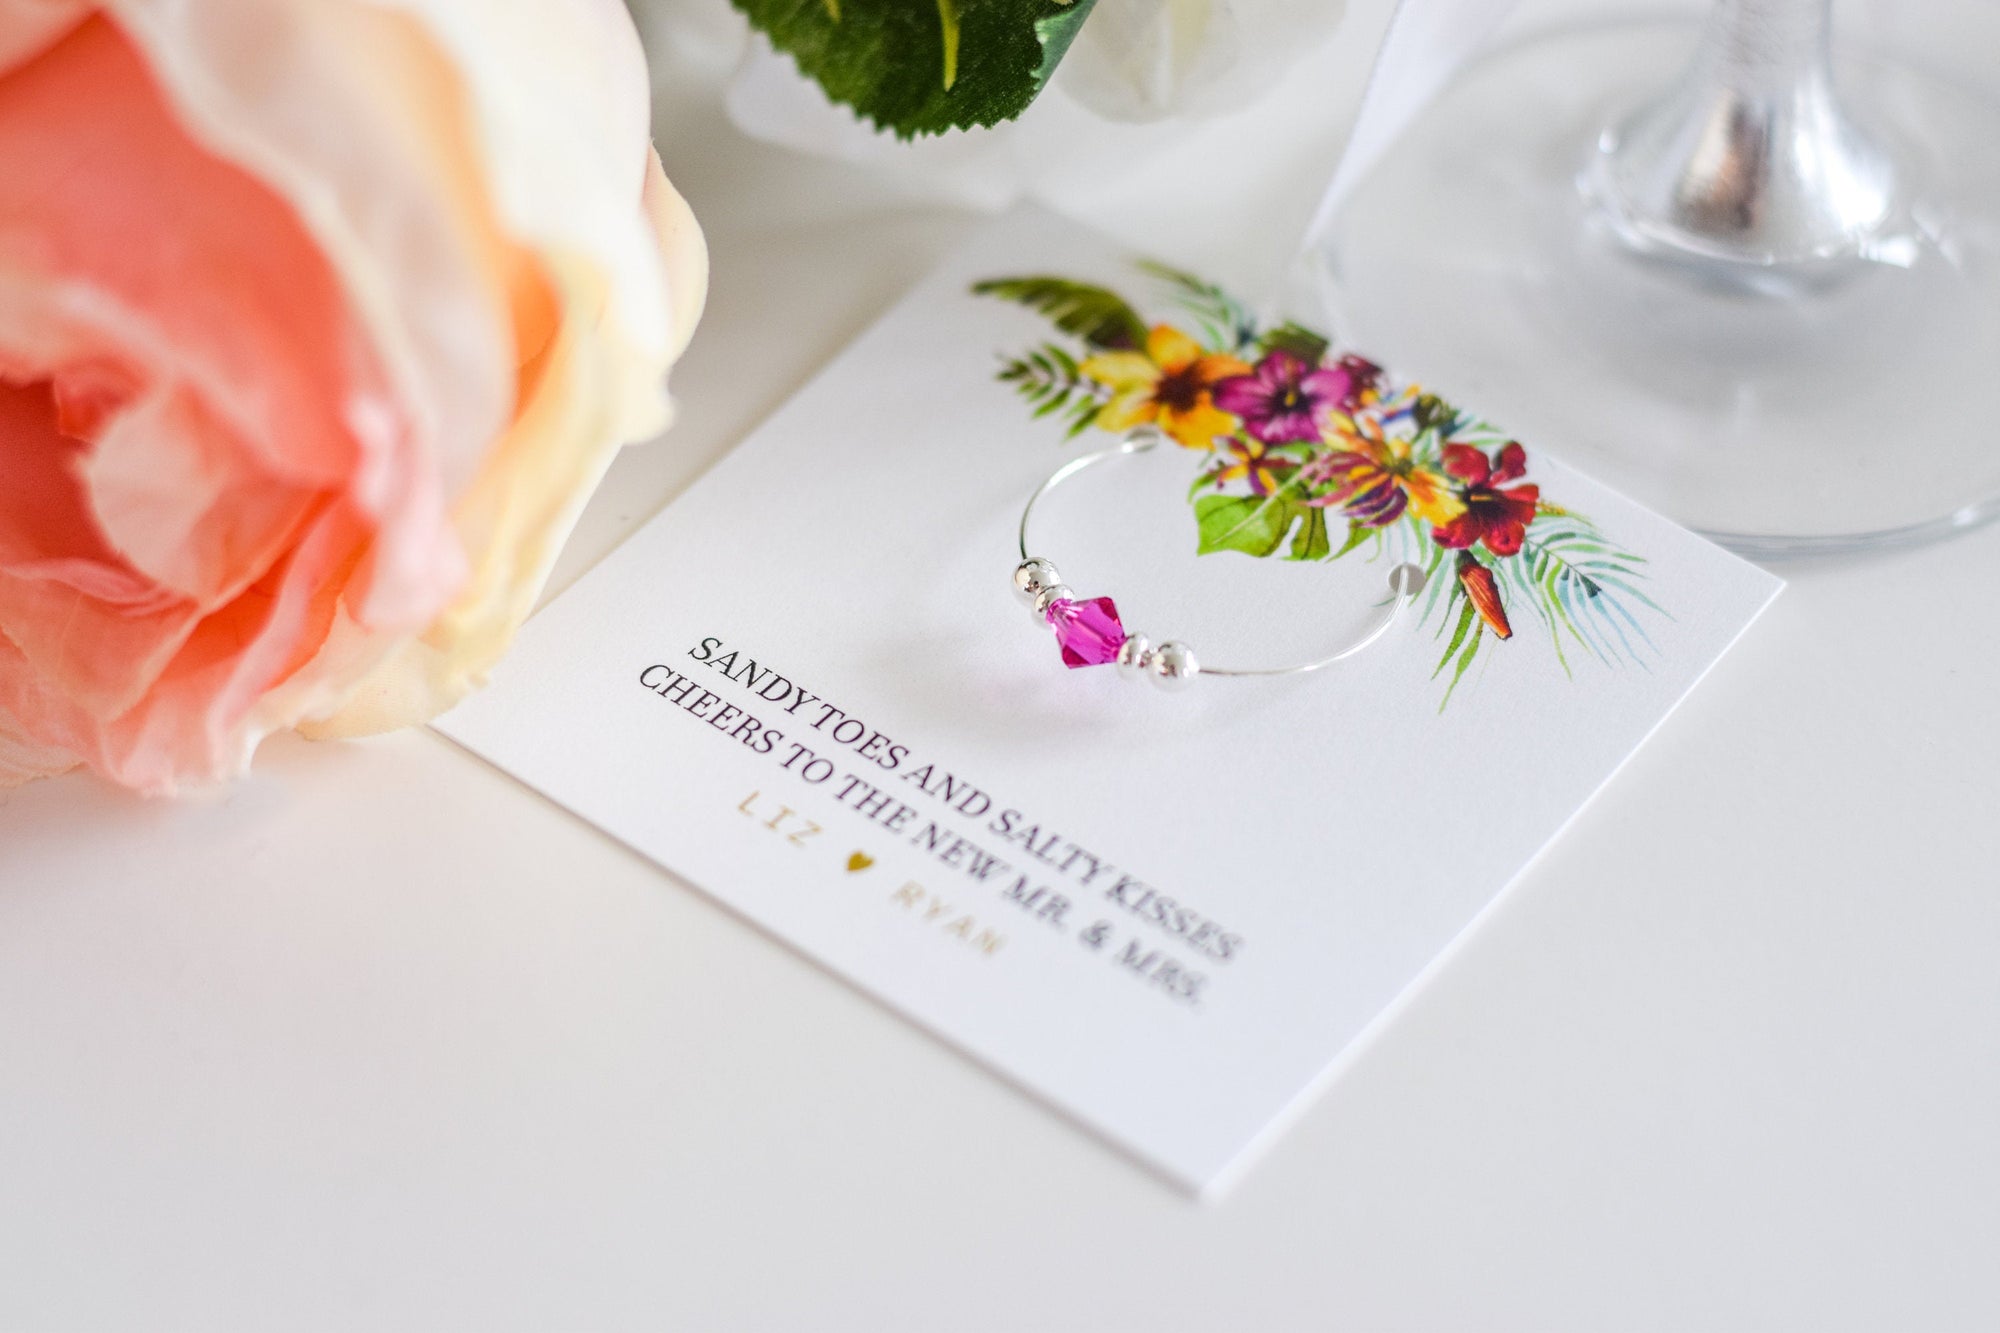 Tropical Engagement Party Favors for Adults, Beach Destination Wedding Engagement Party Favors for Guests, Swarovski Crystal Wine Charms - @PlumPolkaDot 